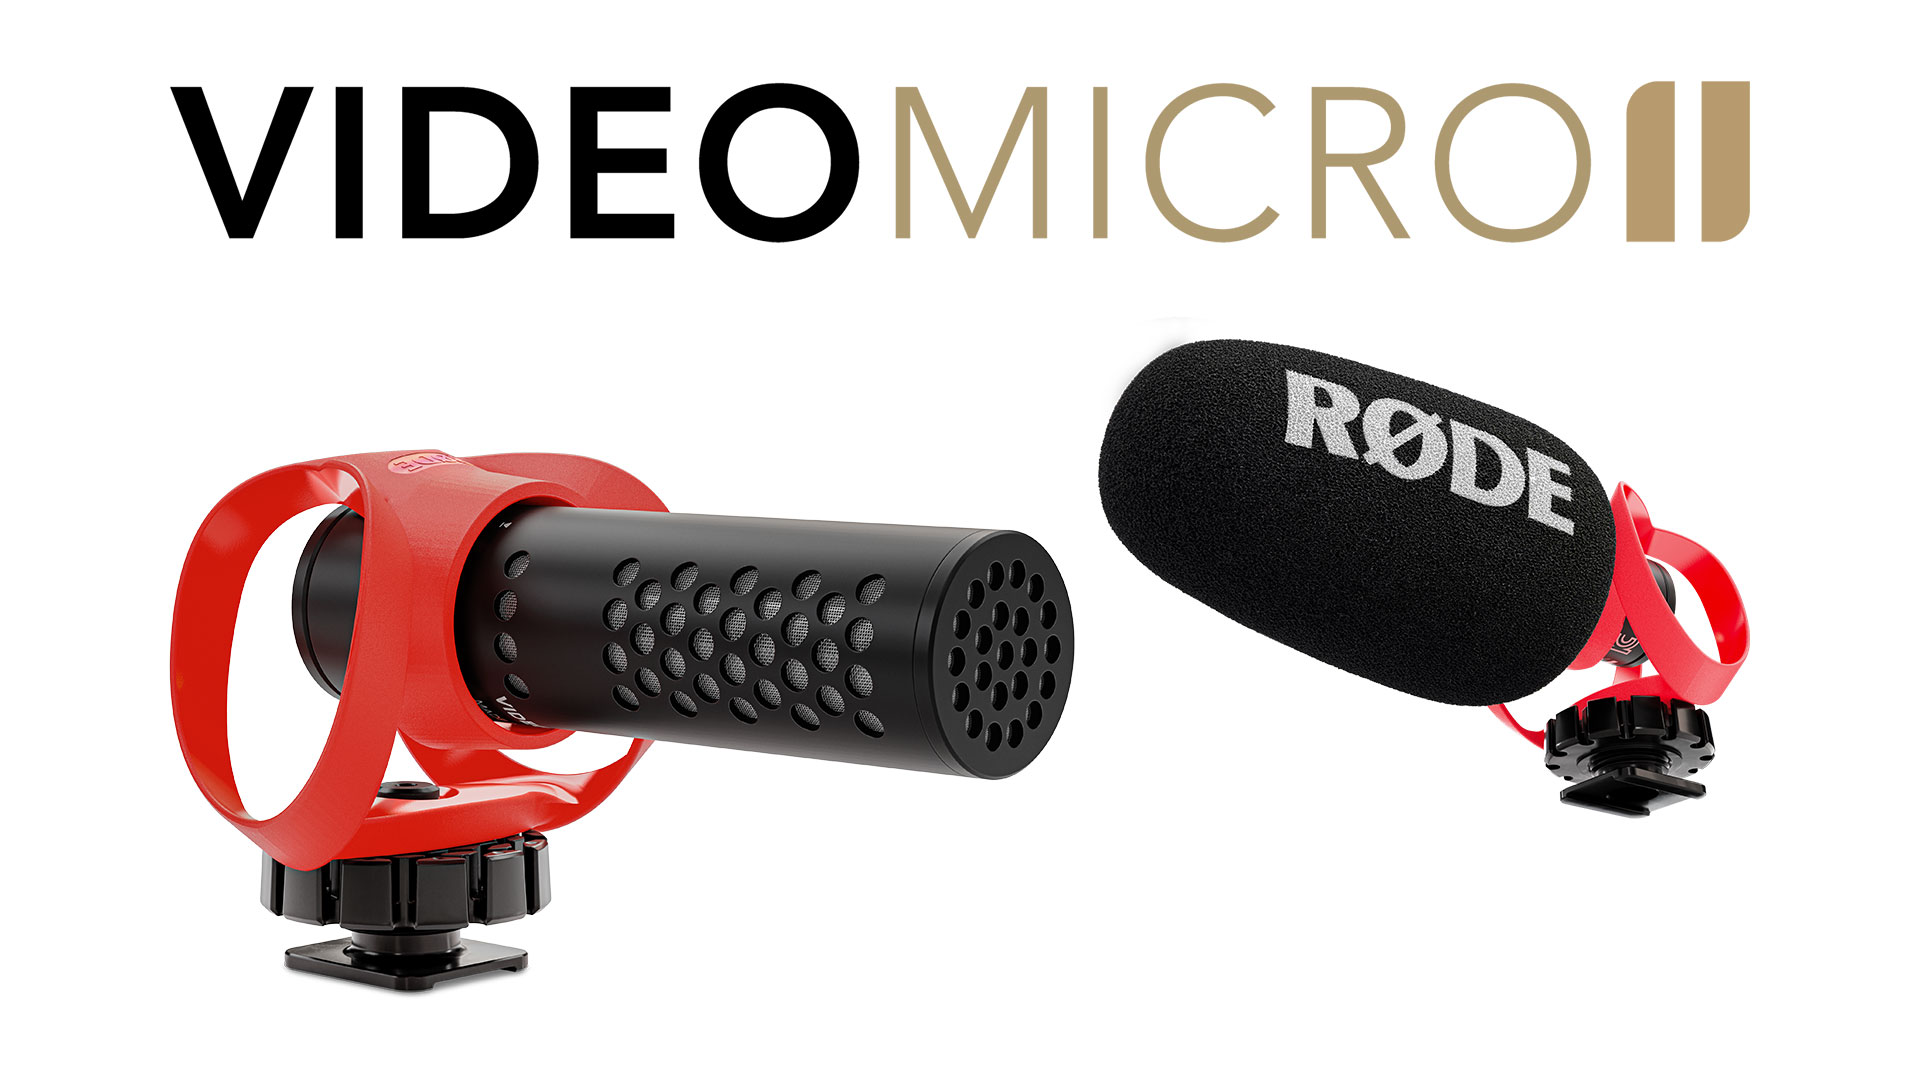 Rent a Rode VideoMicro Compact On-Camera Microphone, Best Prices